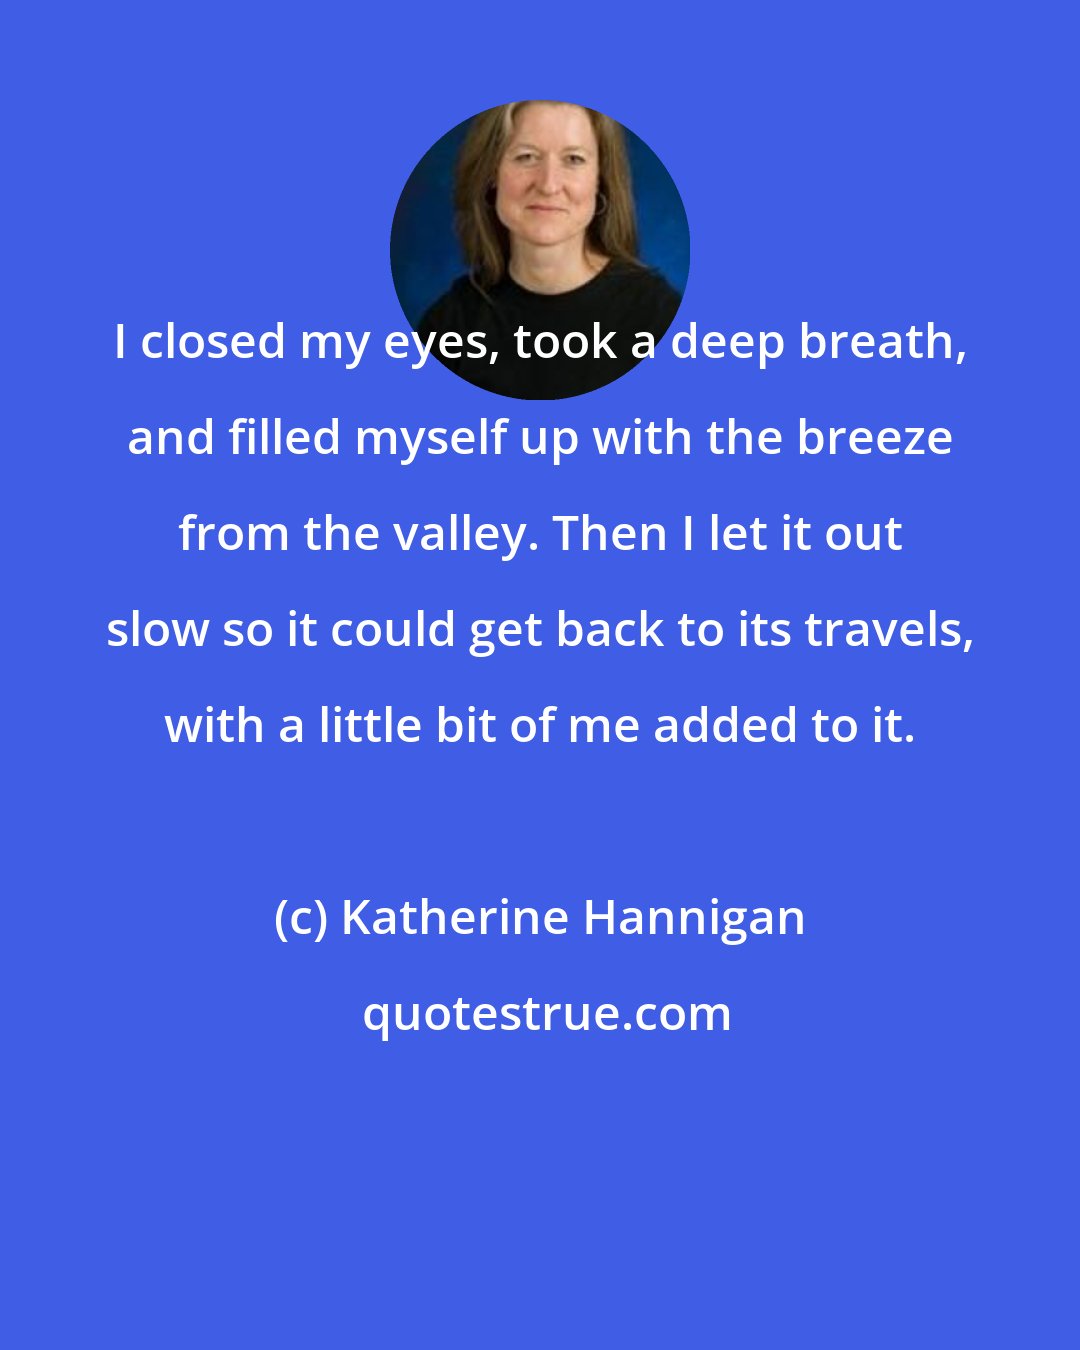 Katherine Hannigan: I closed my eyes, took a deep breath, and filled myself up with the breeze from the valley. Then I let it out slow so it could get back to its travels, with a little bit of me added to it.